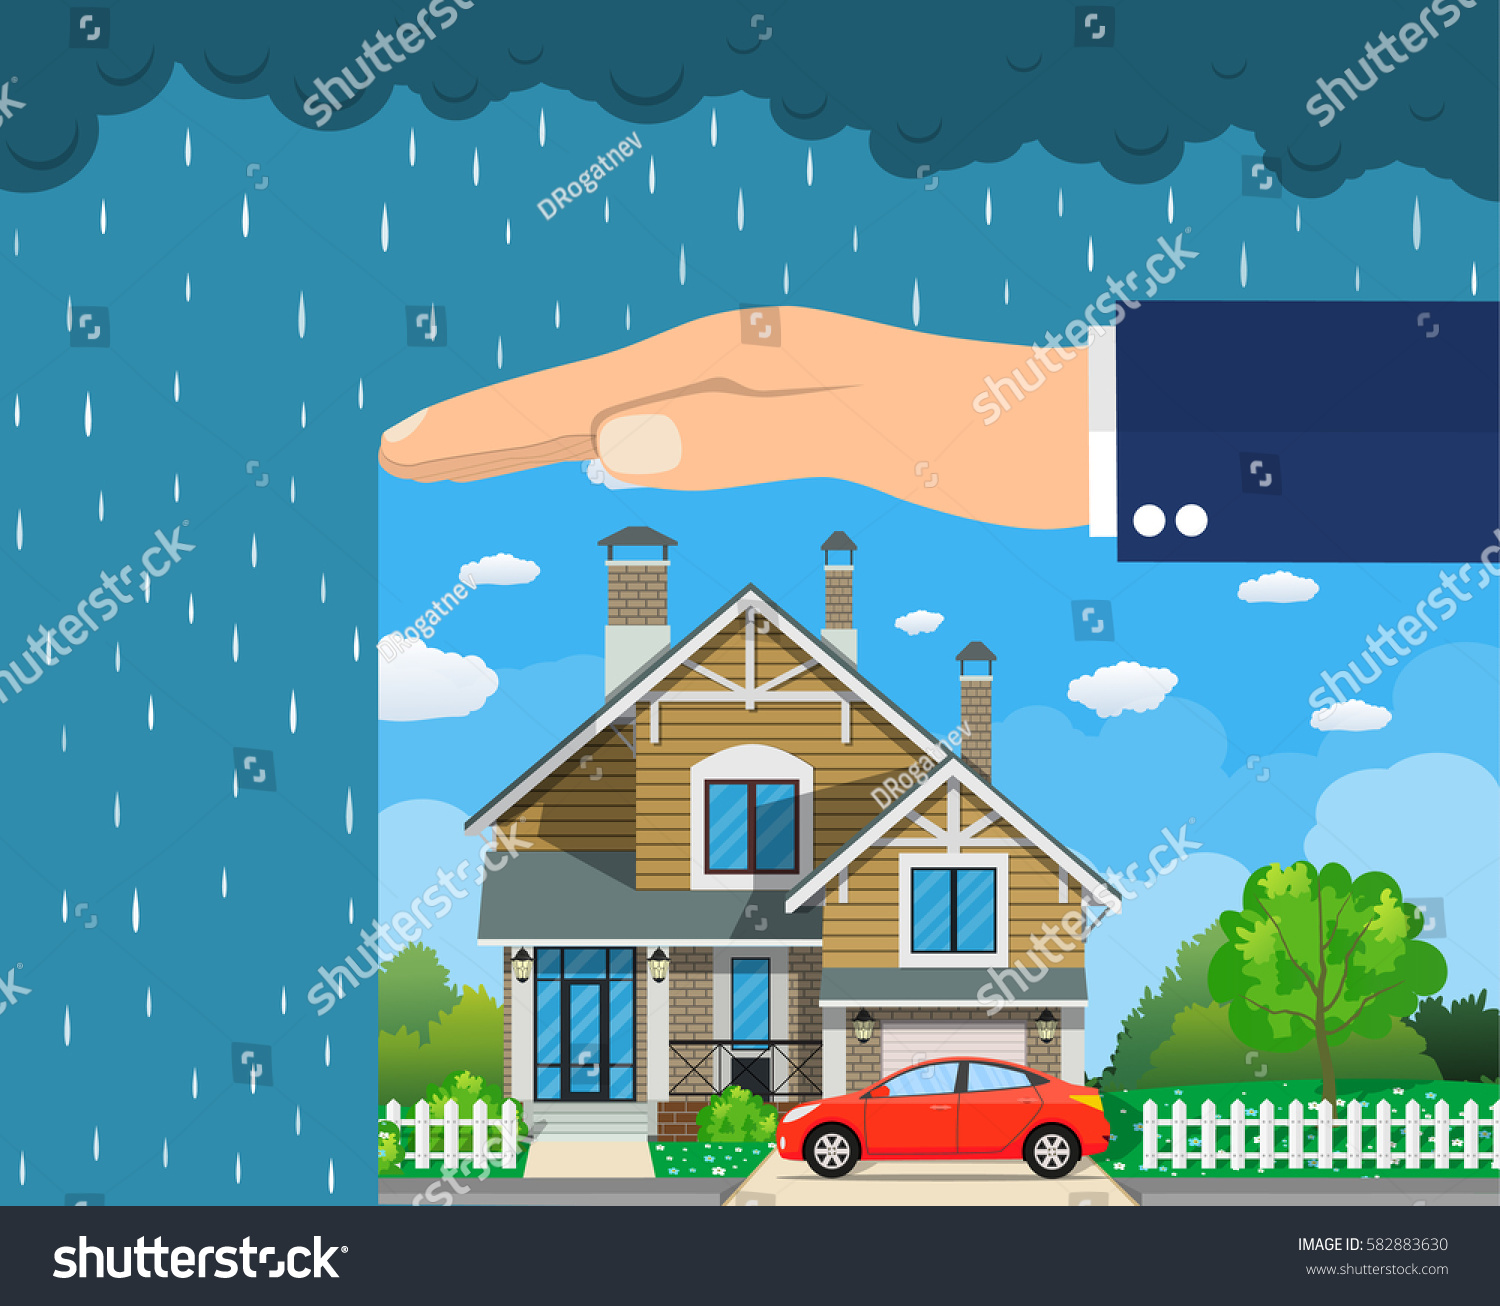 Home Insurance Concept Hands Protecting House Stock Photo (Photo ...